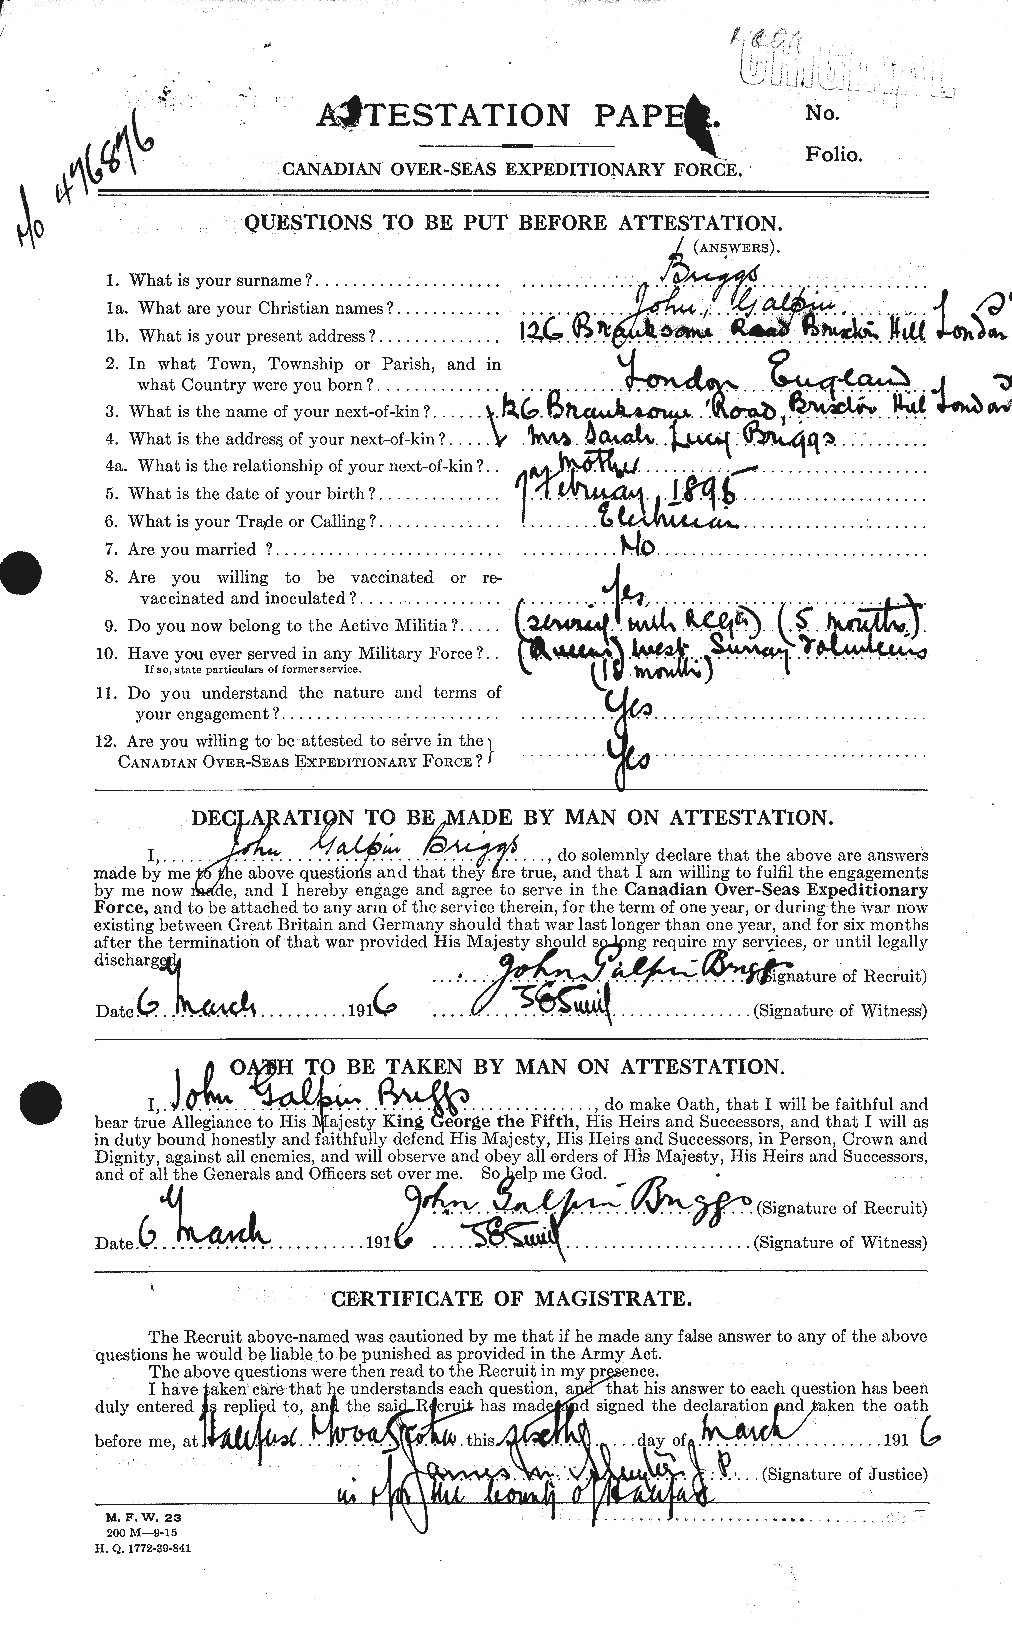 Personnel Records of the First World War - CEF 264060a